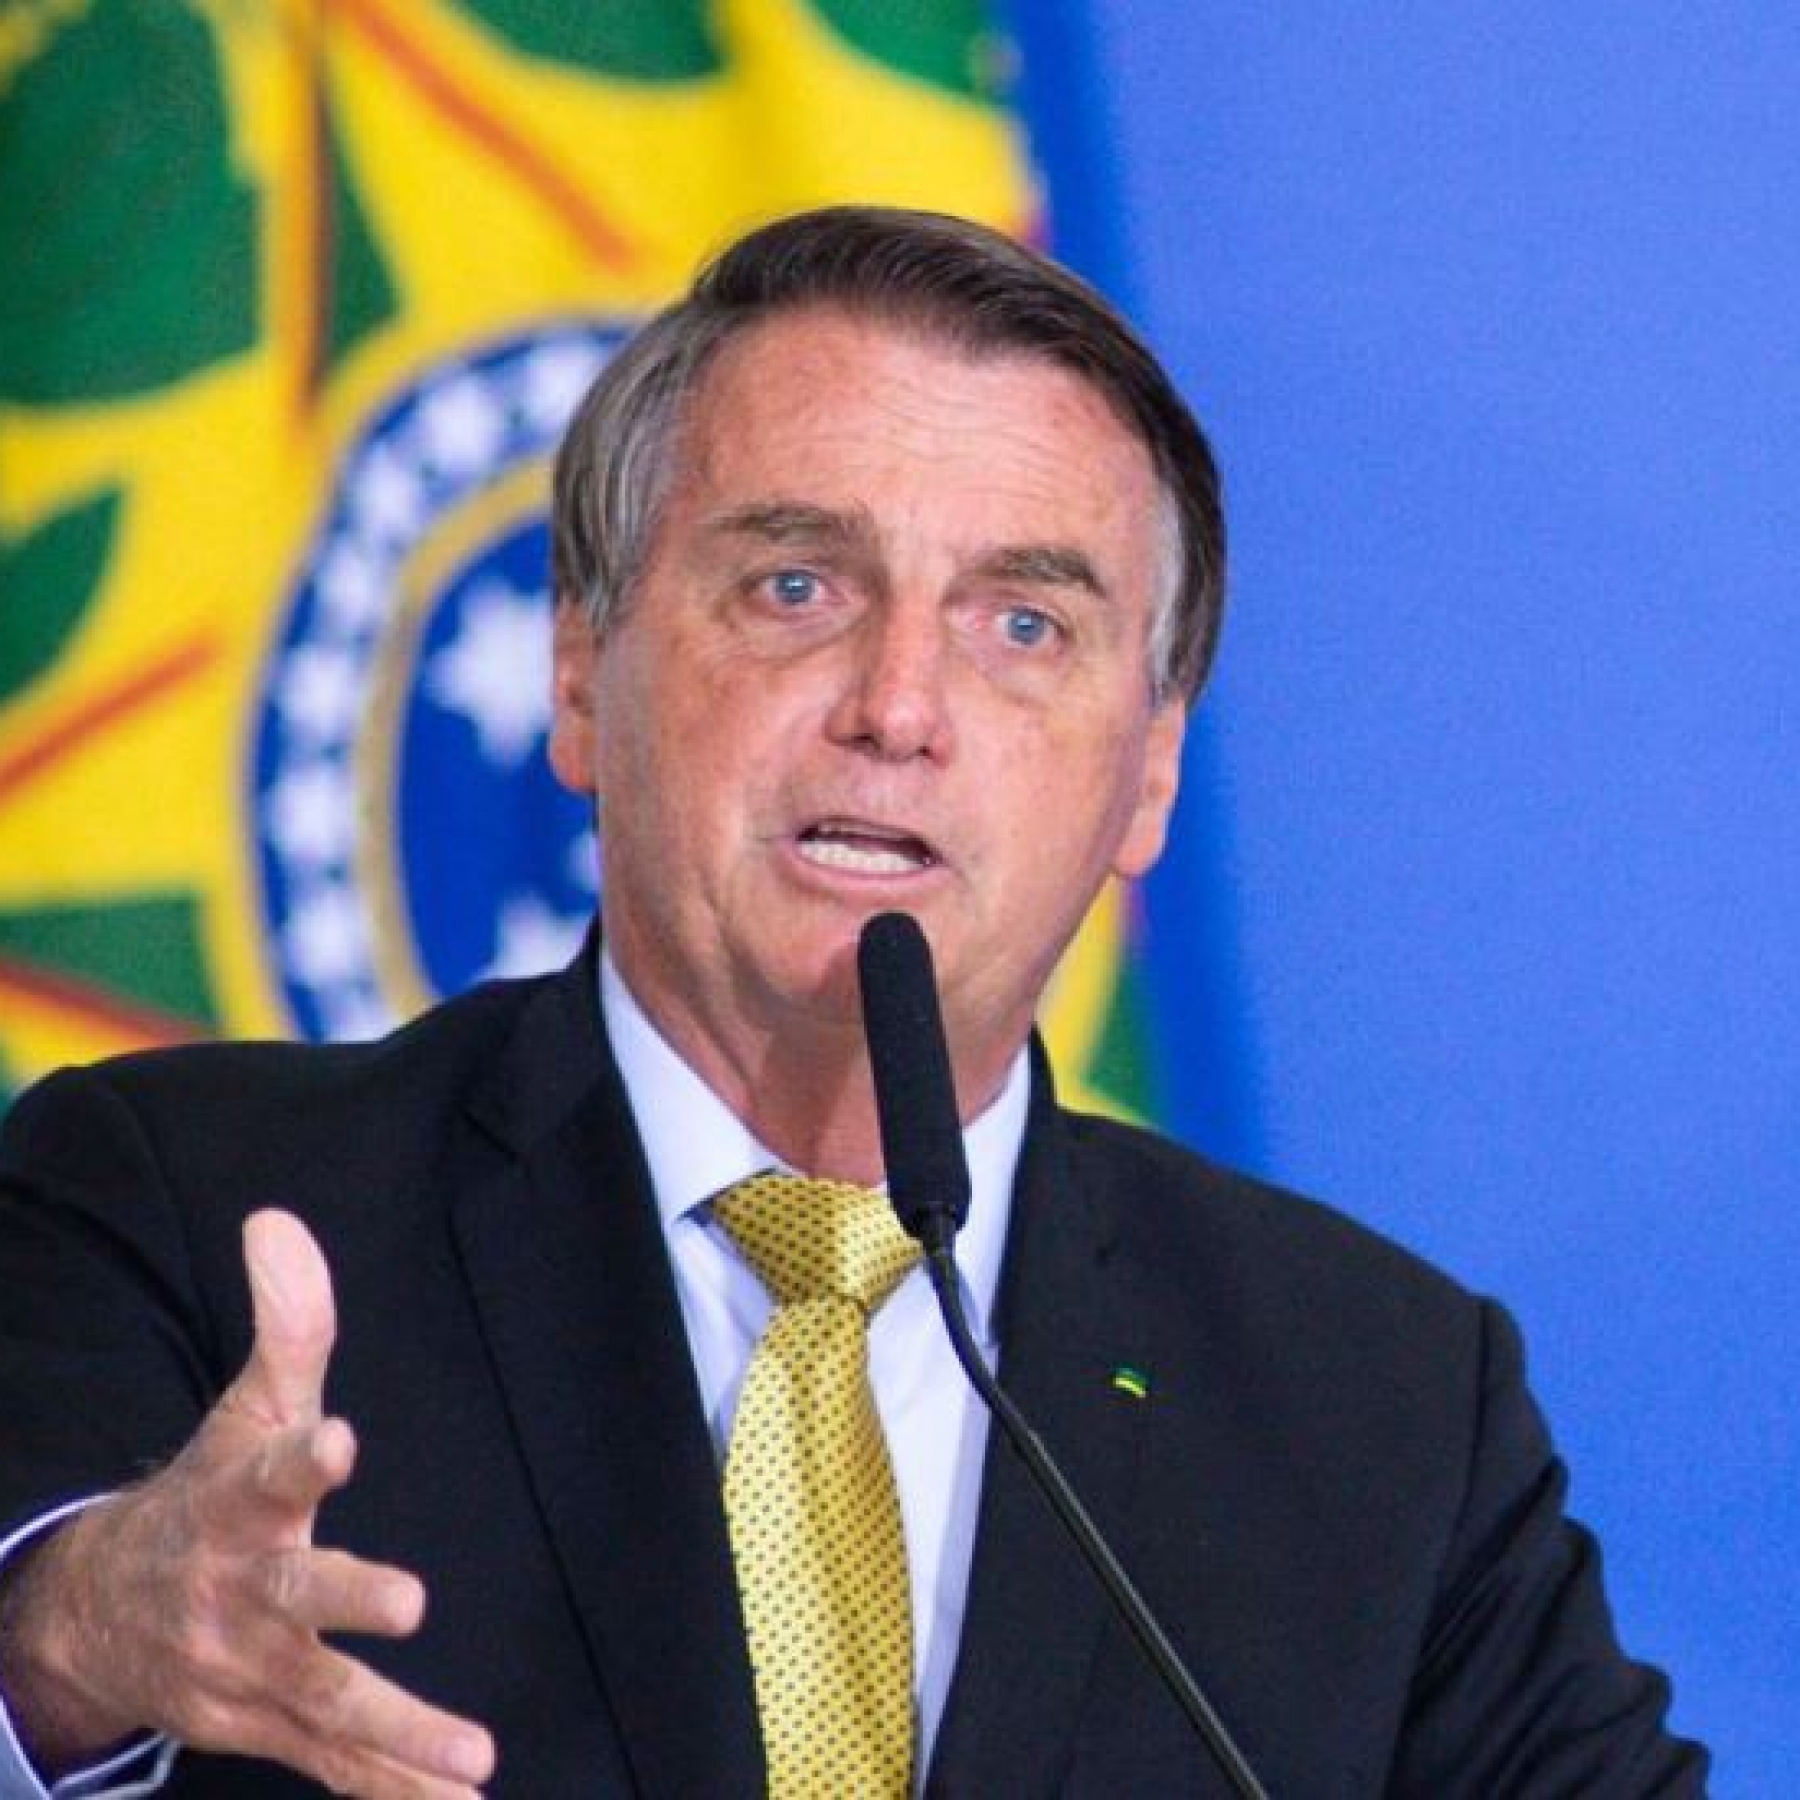 Bolsonaro under fire over claims family paid for 51 properties in cash